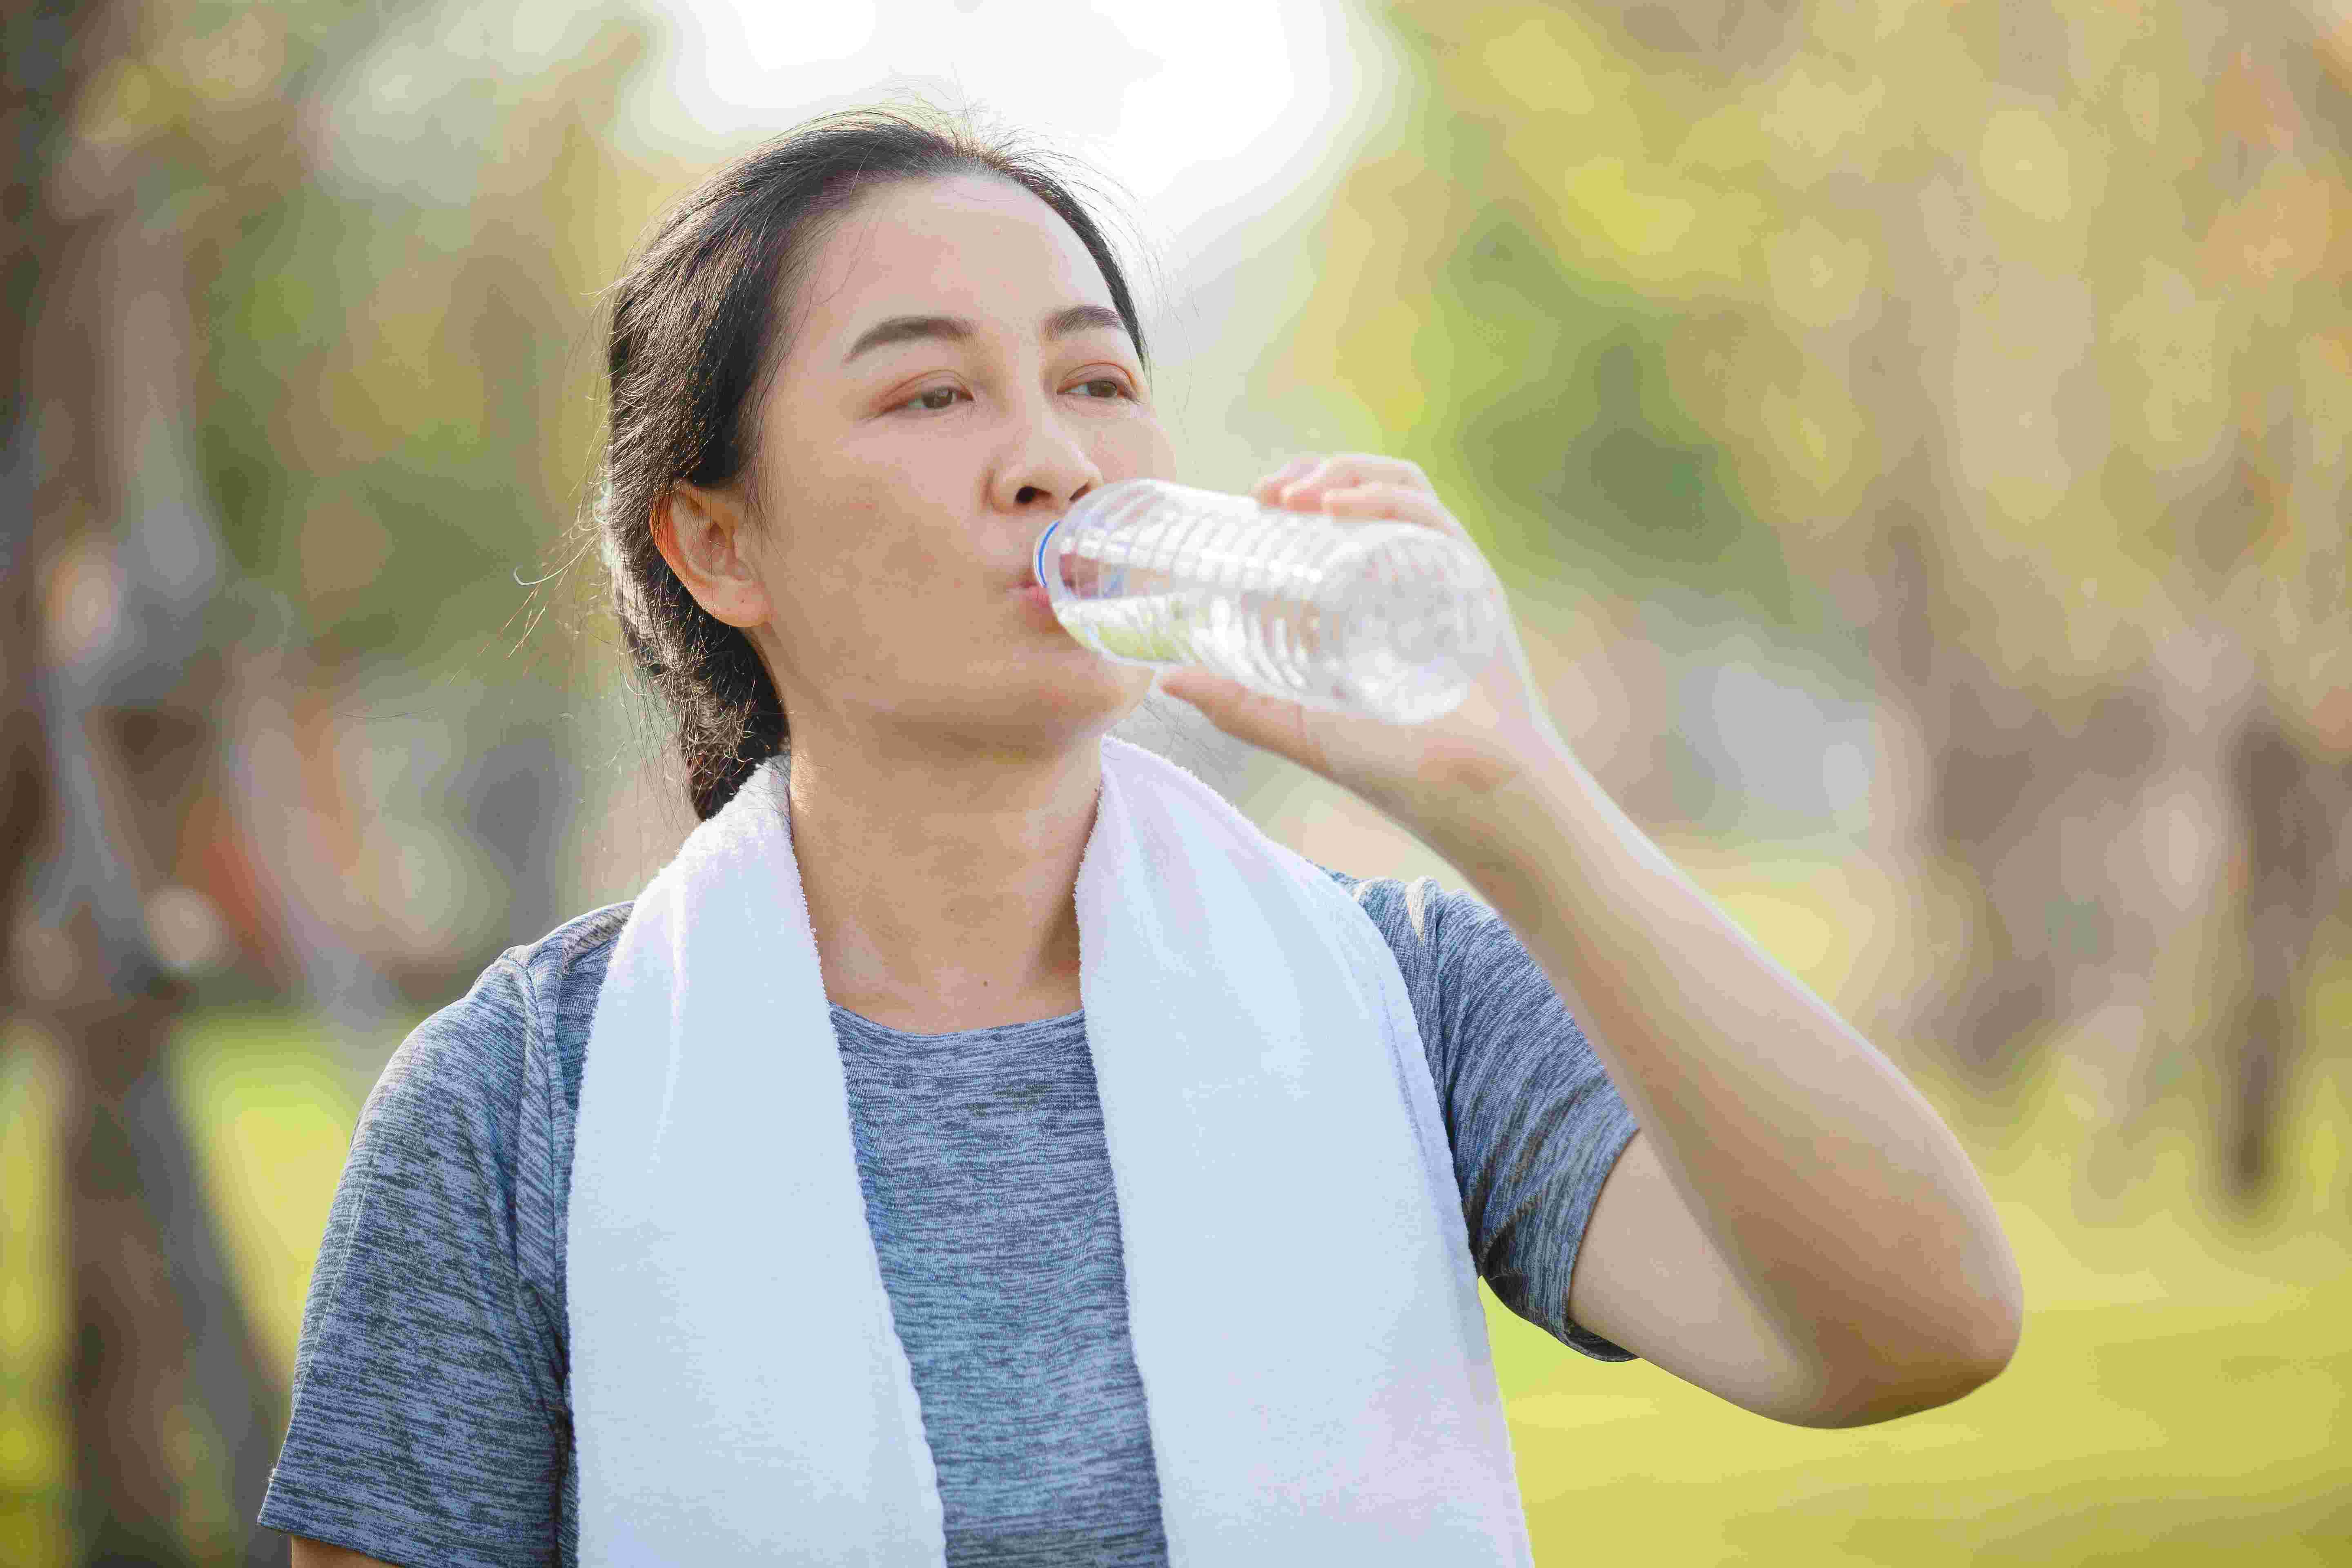 Woman with towel on neck drinking water after exercising while on dialysis